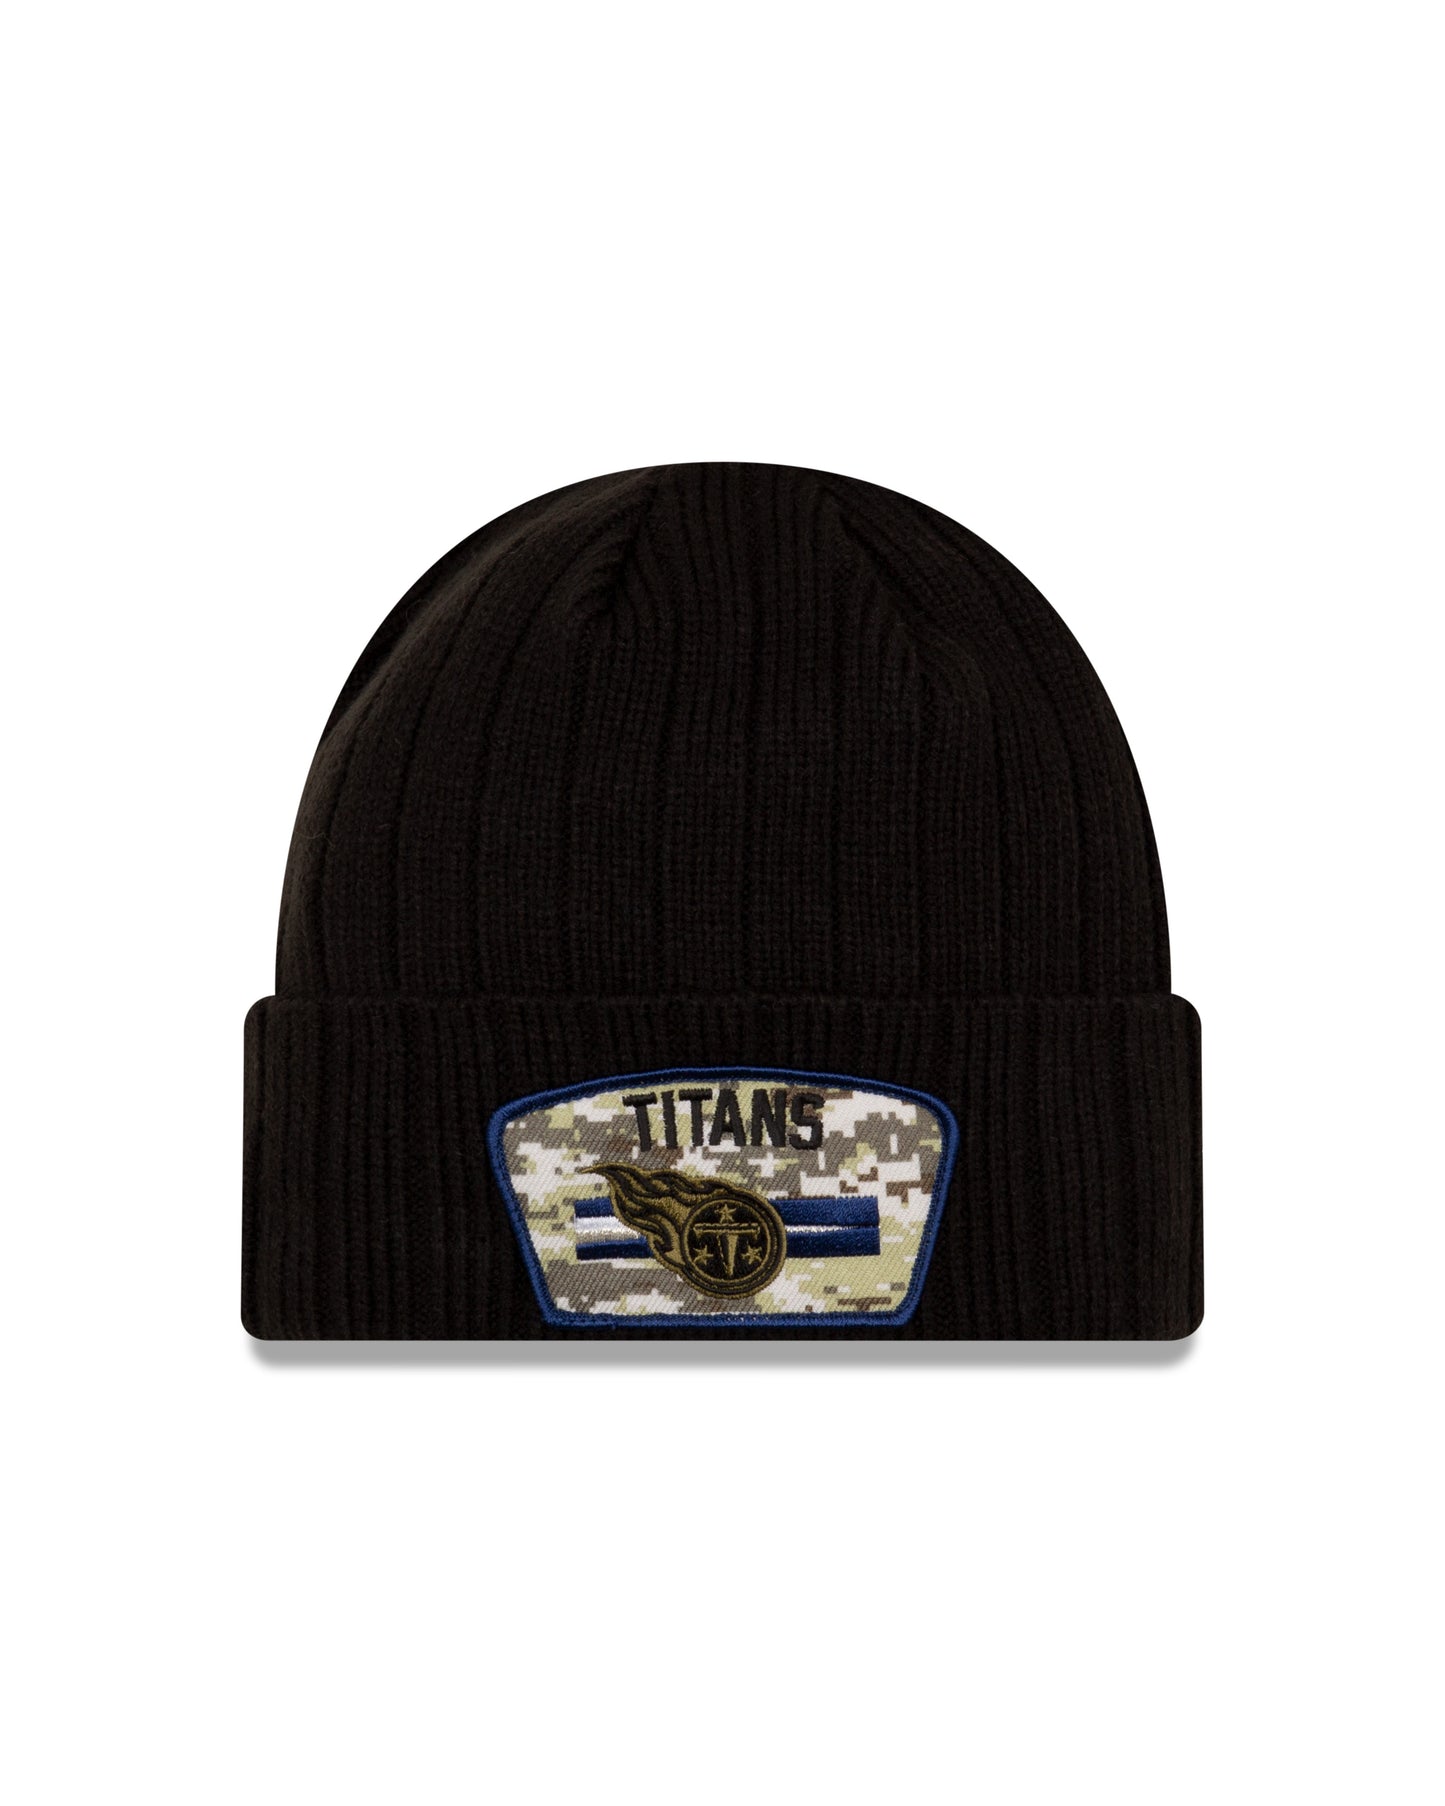 Tennessee Titans New Era Salute to Service Sideline Knit Hat- Black